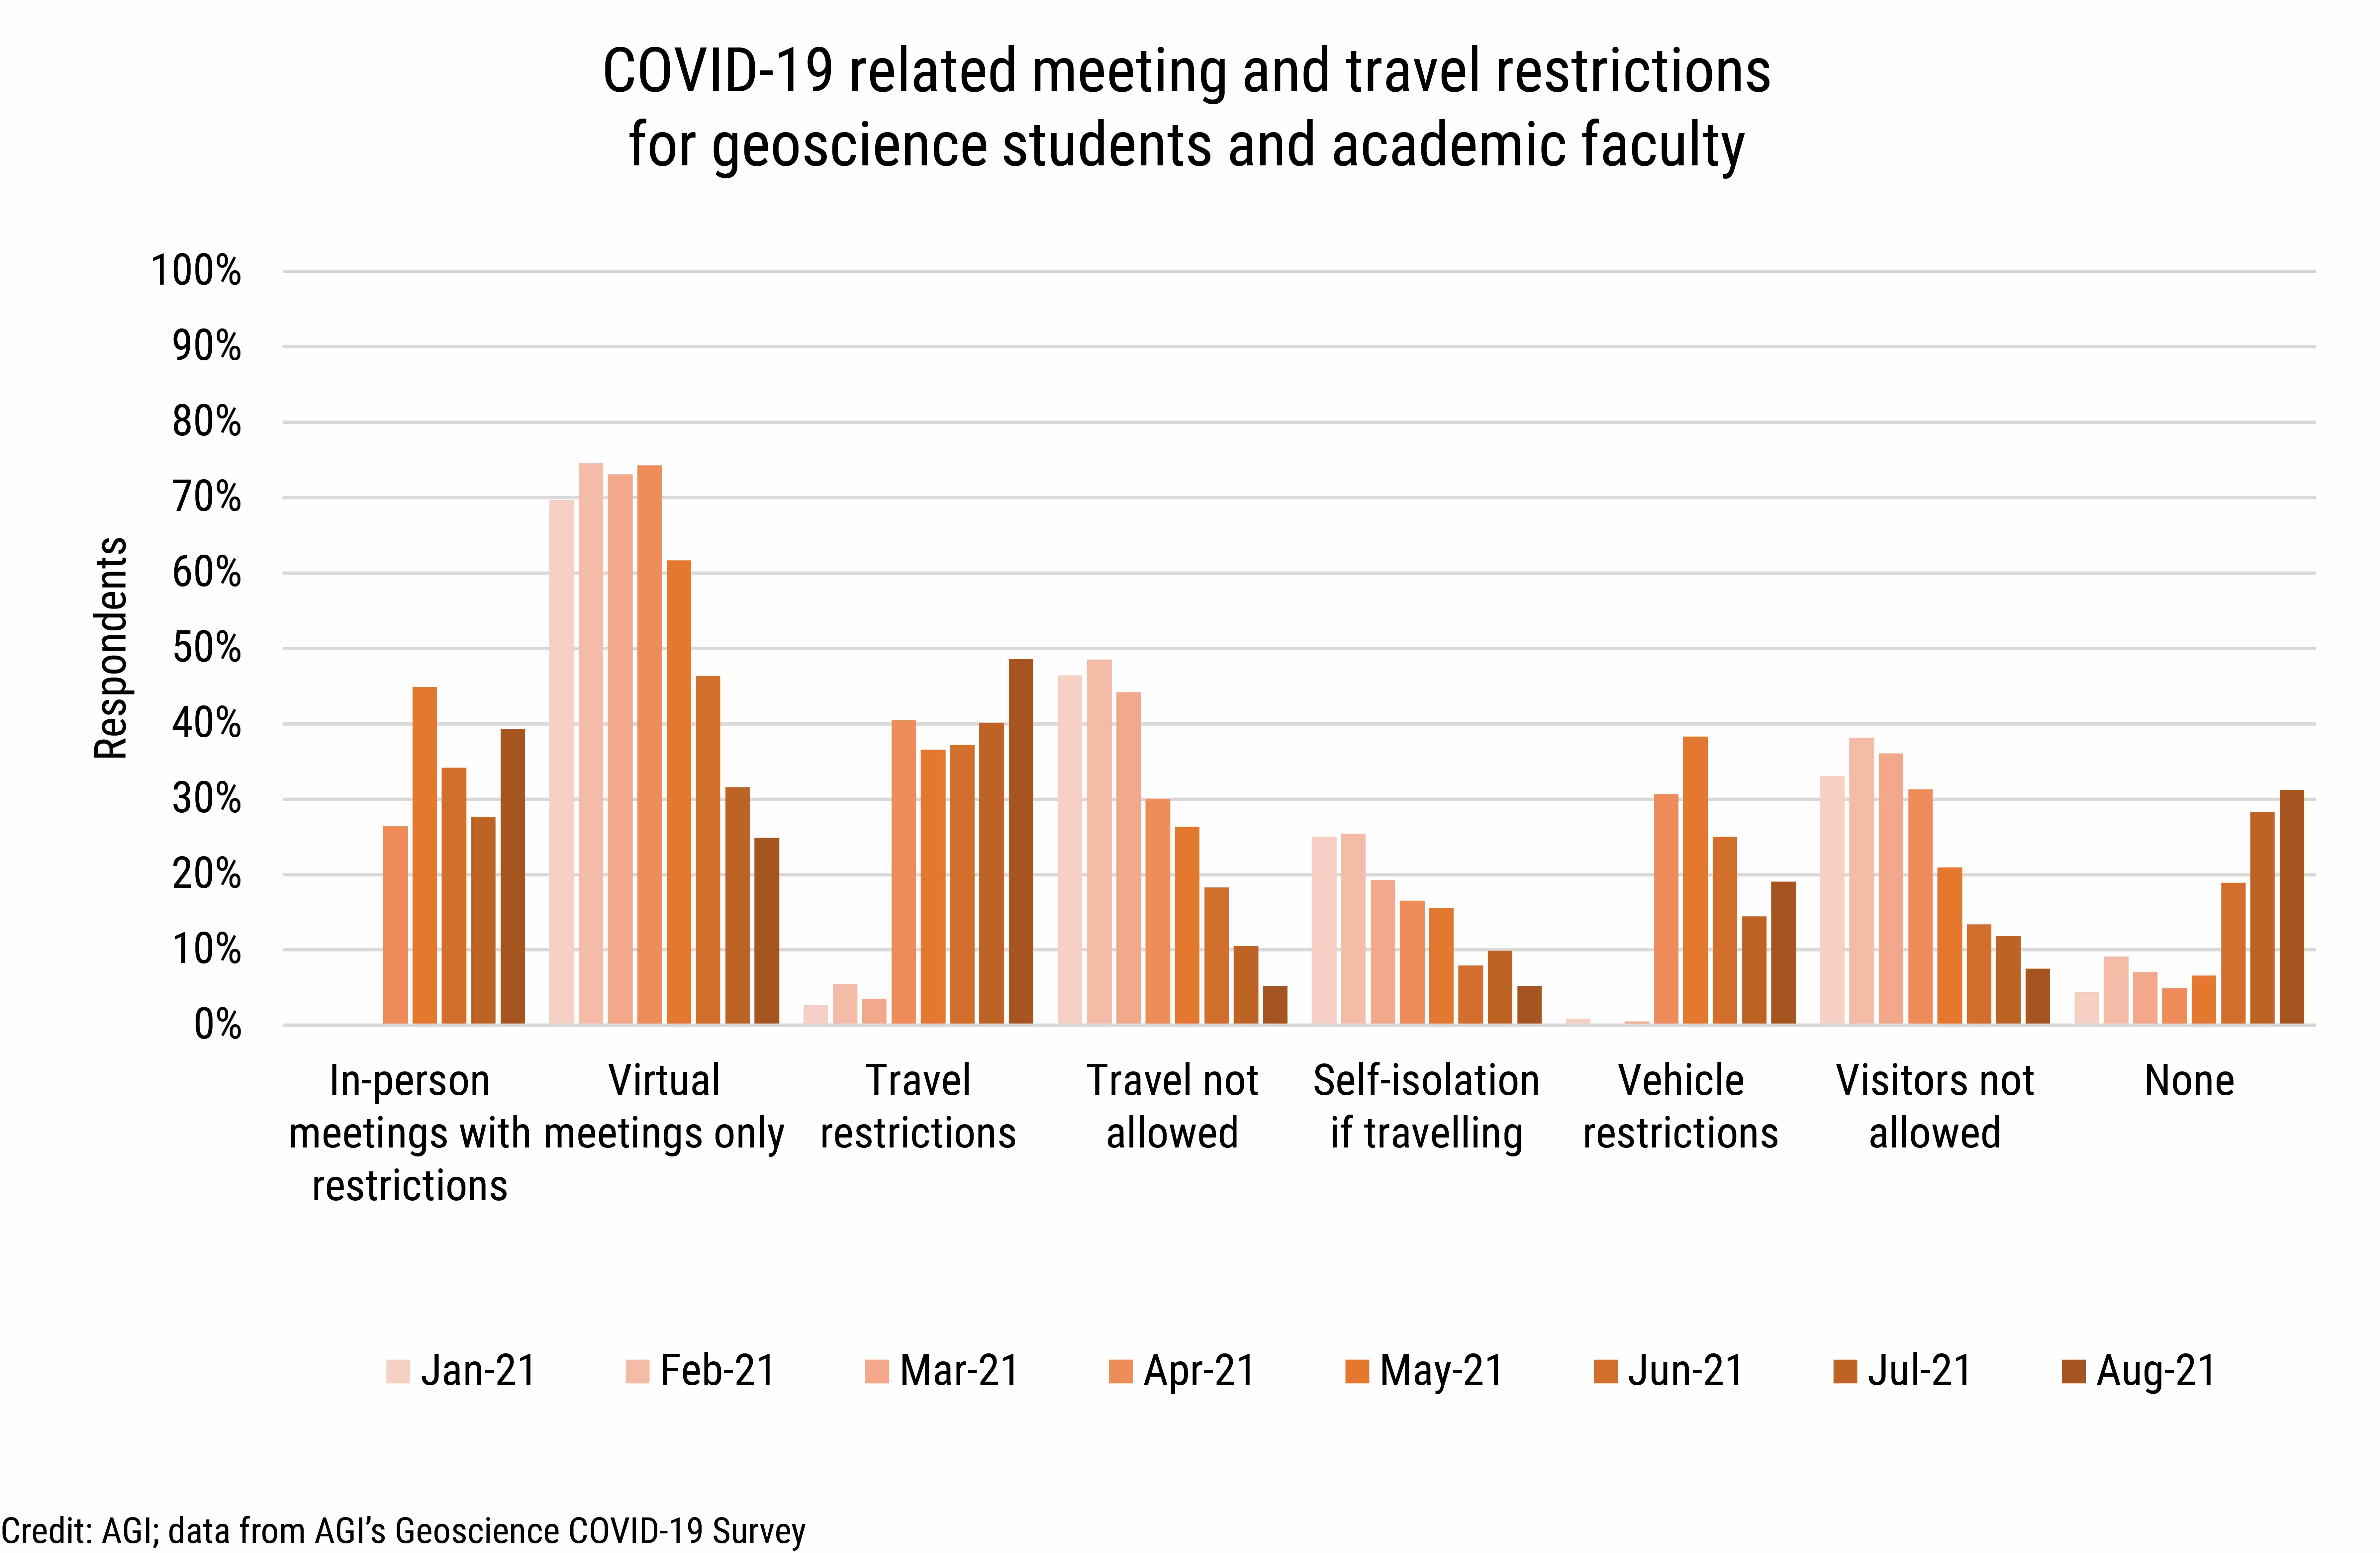 DB_2021-031 chart 05: COVID-19 related meeting and travel restrictions for geoscience students and academic faculty (Credit: AGI; data from AGI's Geoscience COVID-19 Survey)